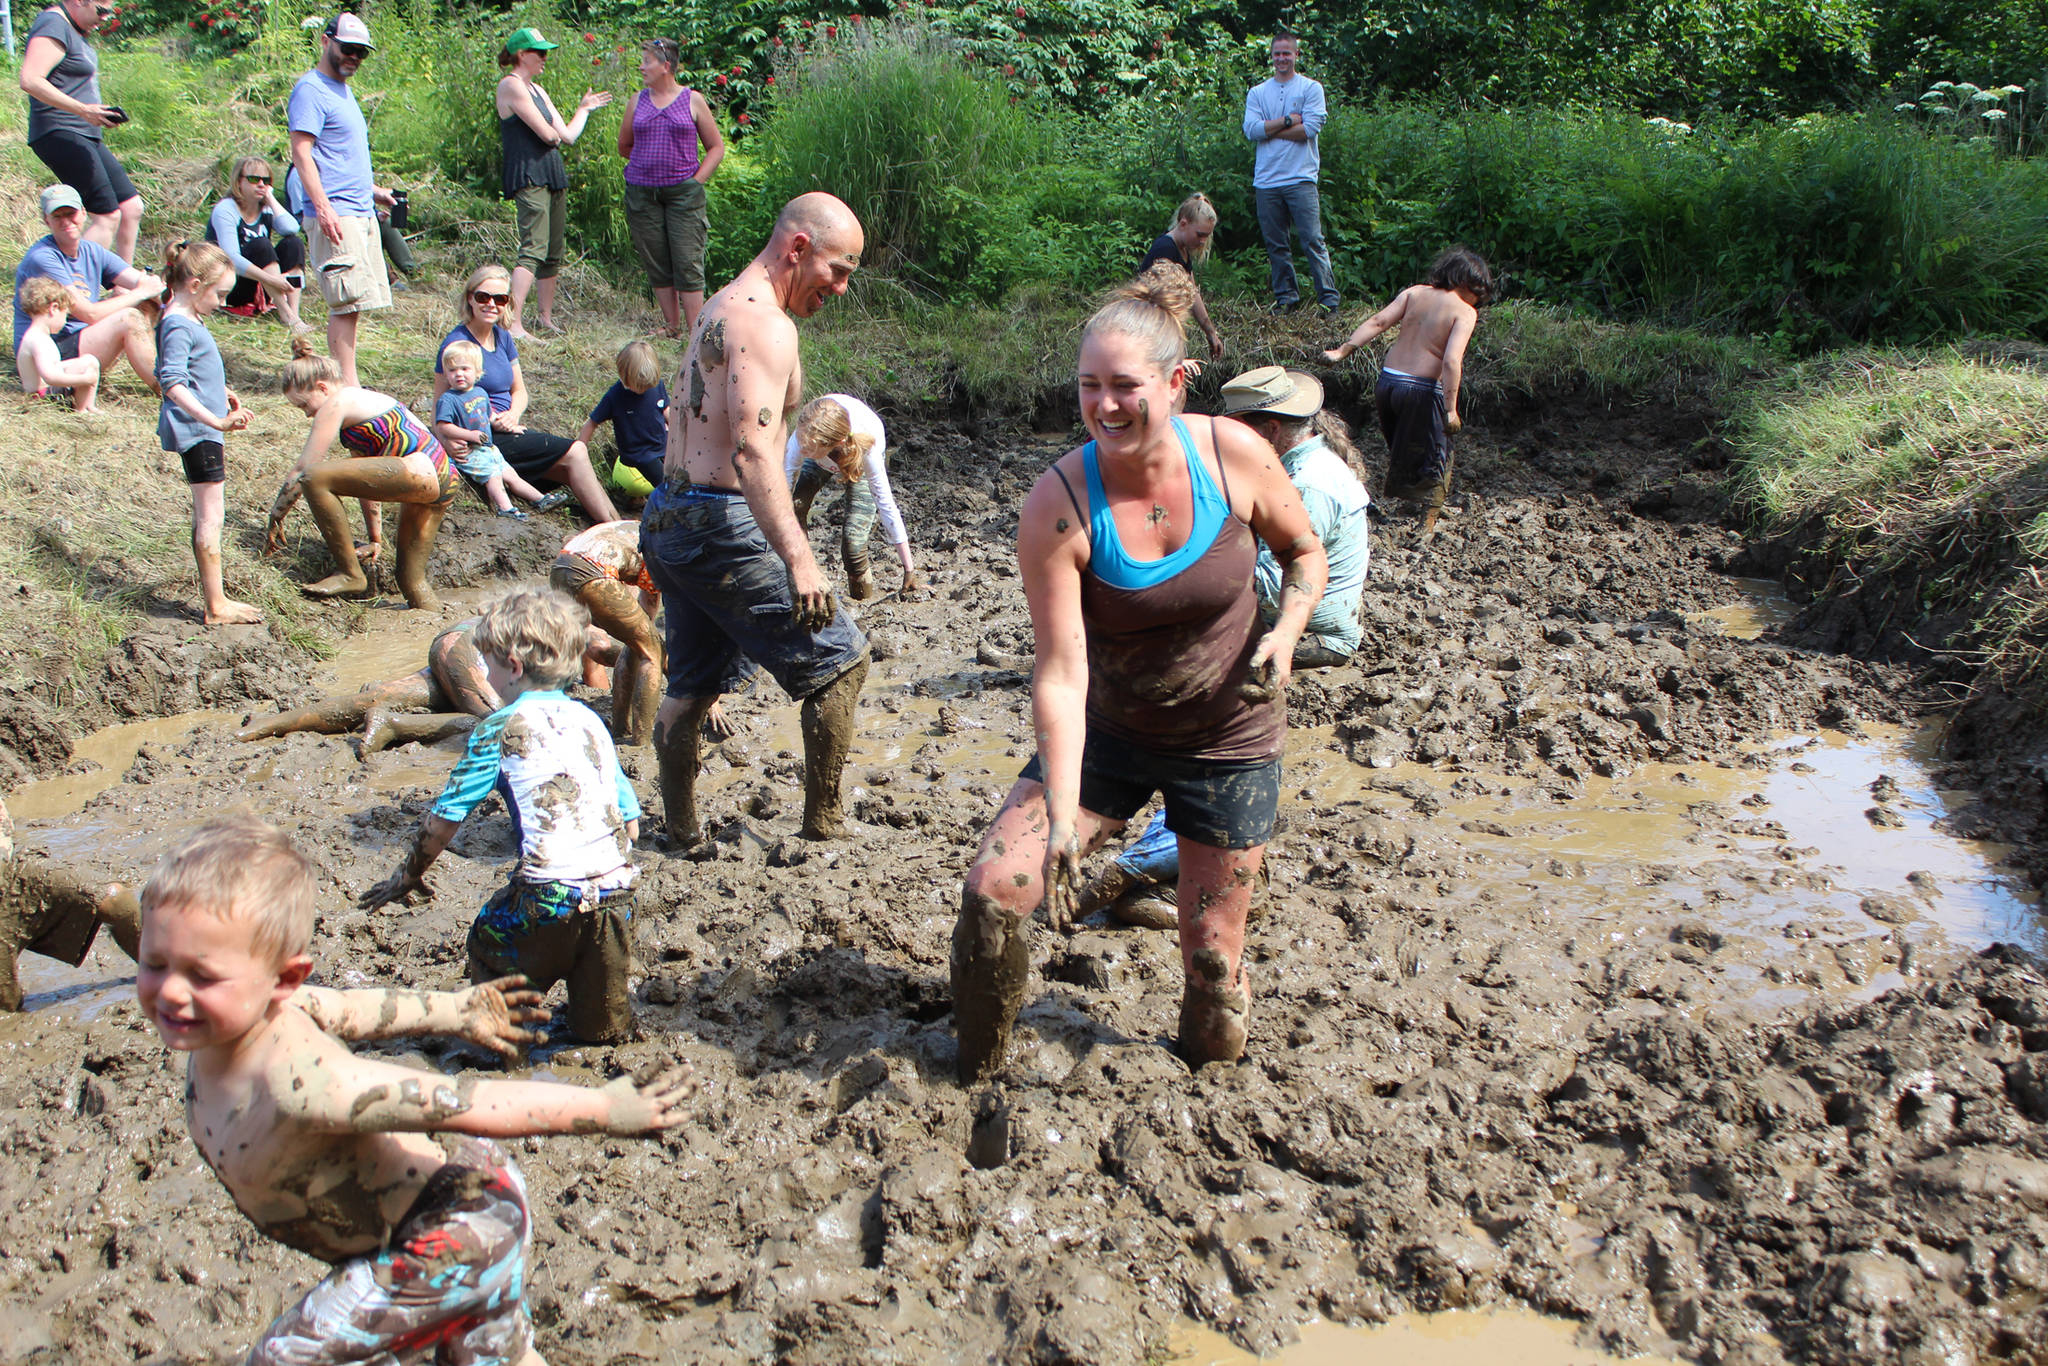 Kids let loose with their parents in annual Mud Games